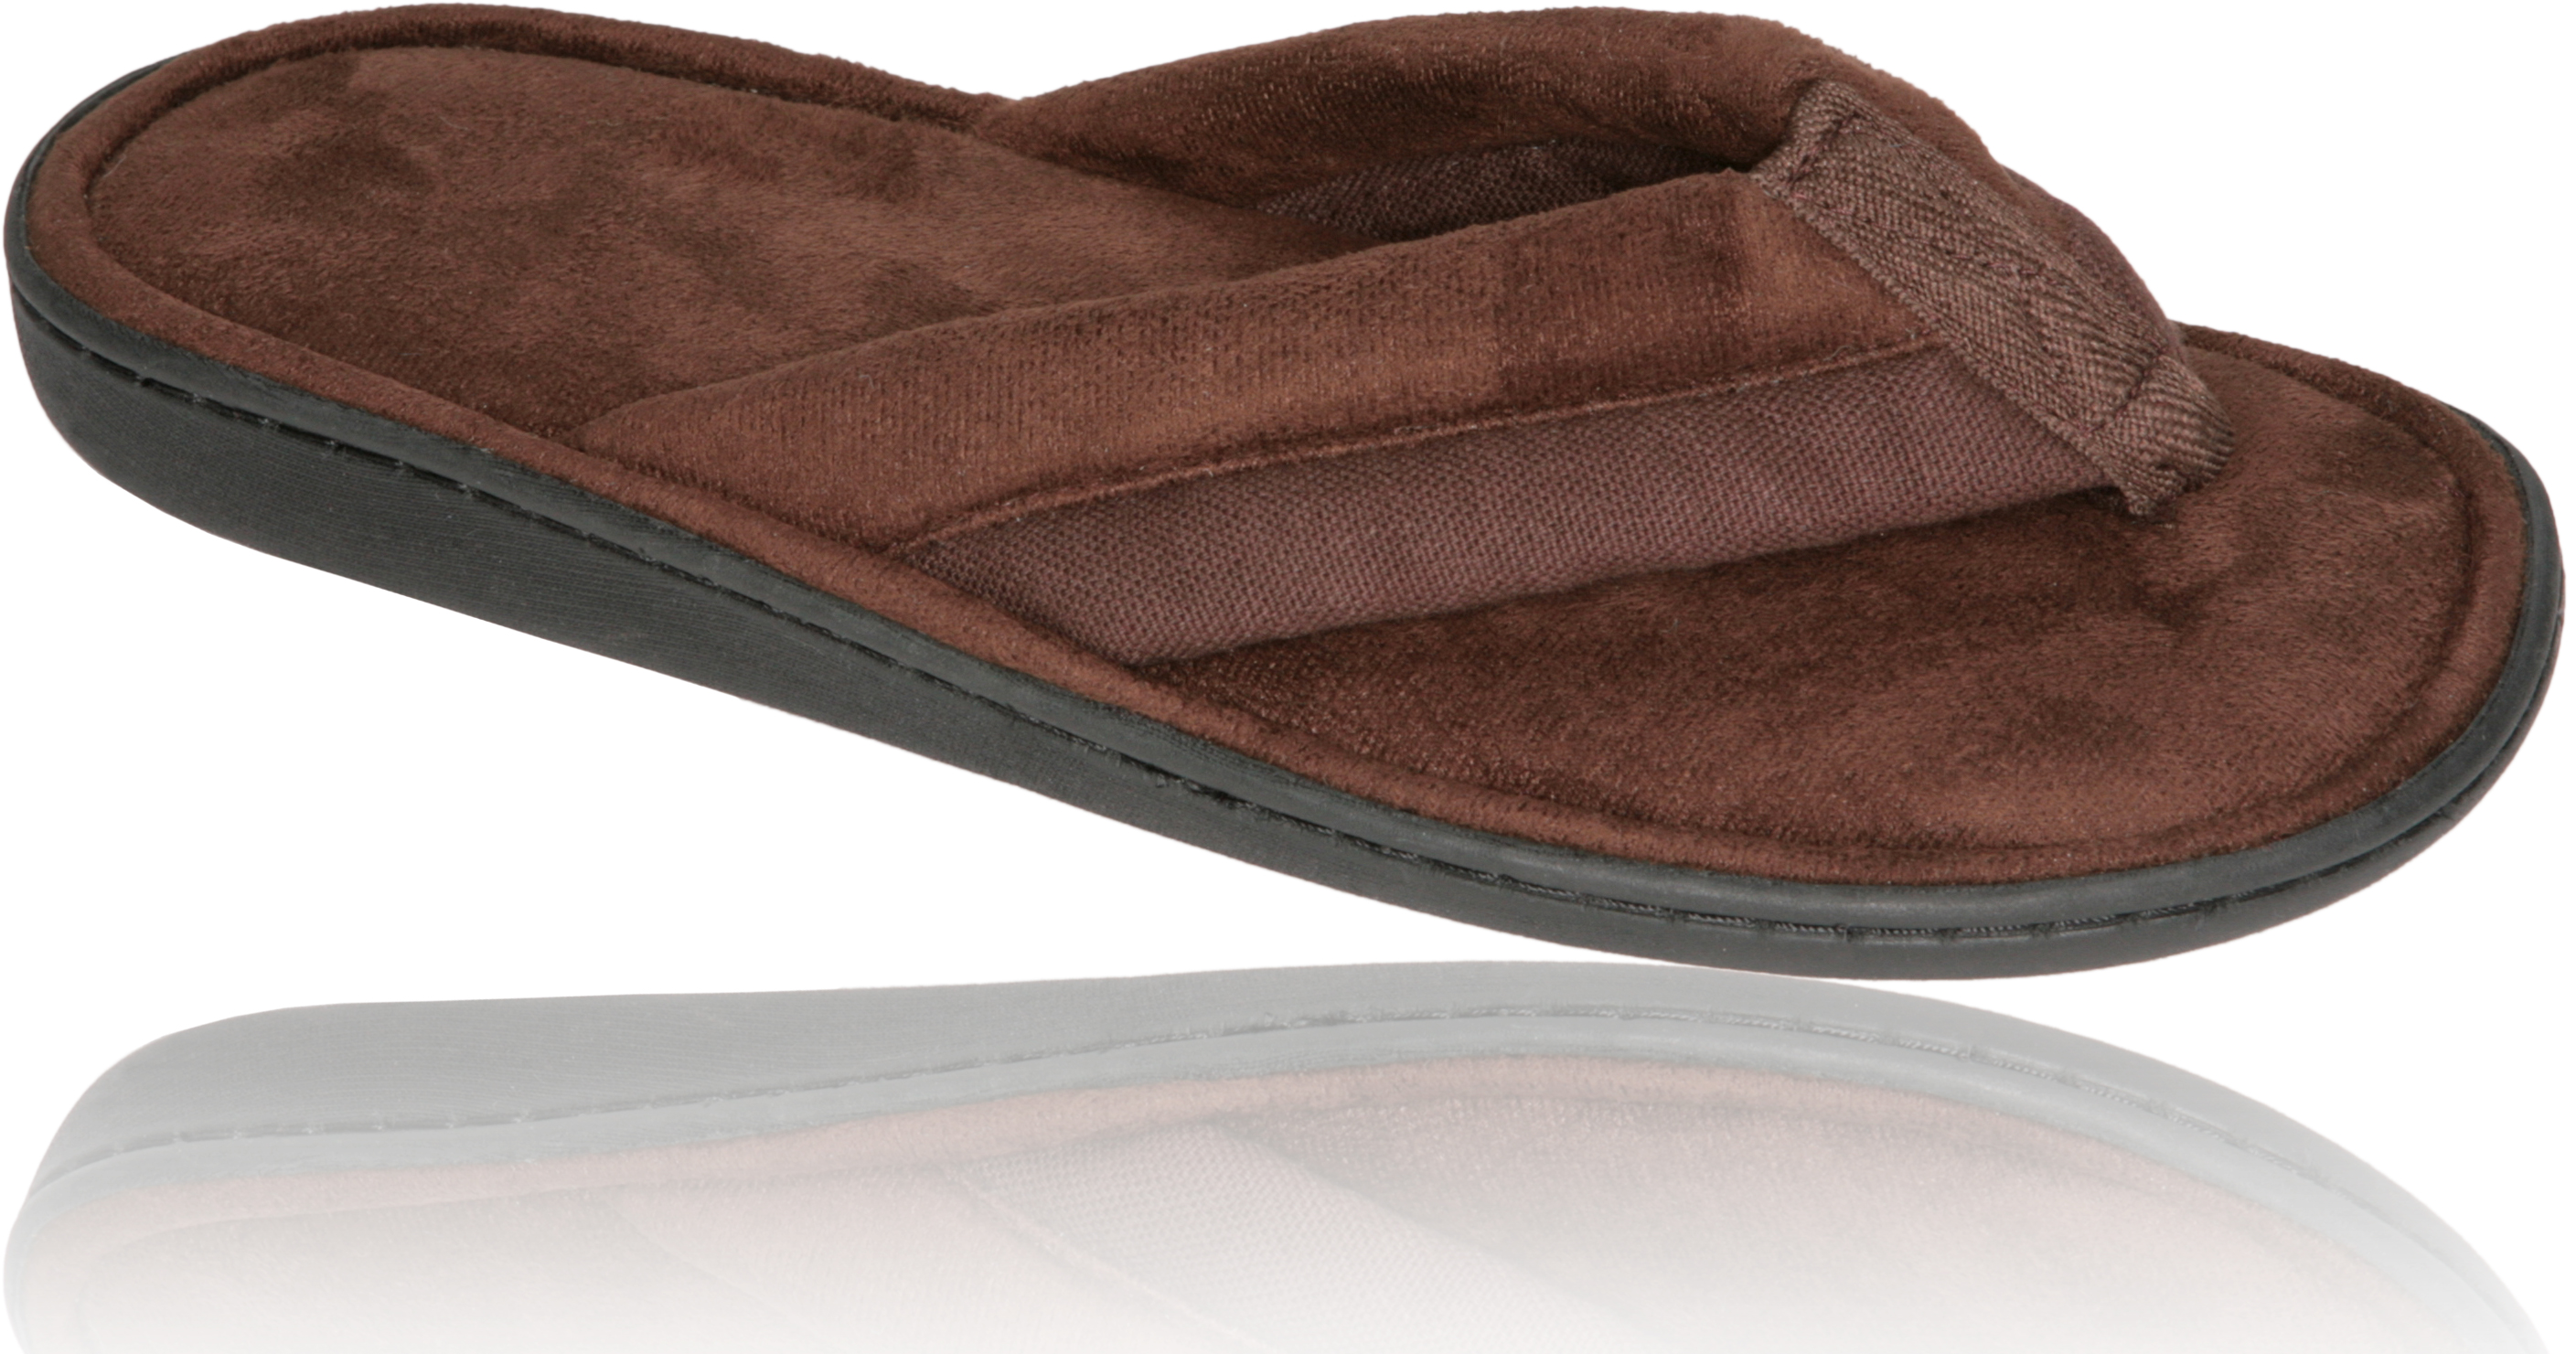 Deluxe Comfort Mens Memory Foam Slipper, Size 11-12 - Soft Linen 120D SBR Insole & Rubber Outsole - Pure Suede Shoes - Non Marking Sole - Mens Slippers, Brown - image 1 of 5